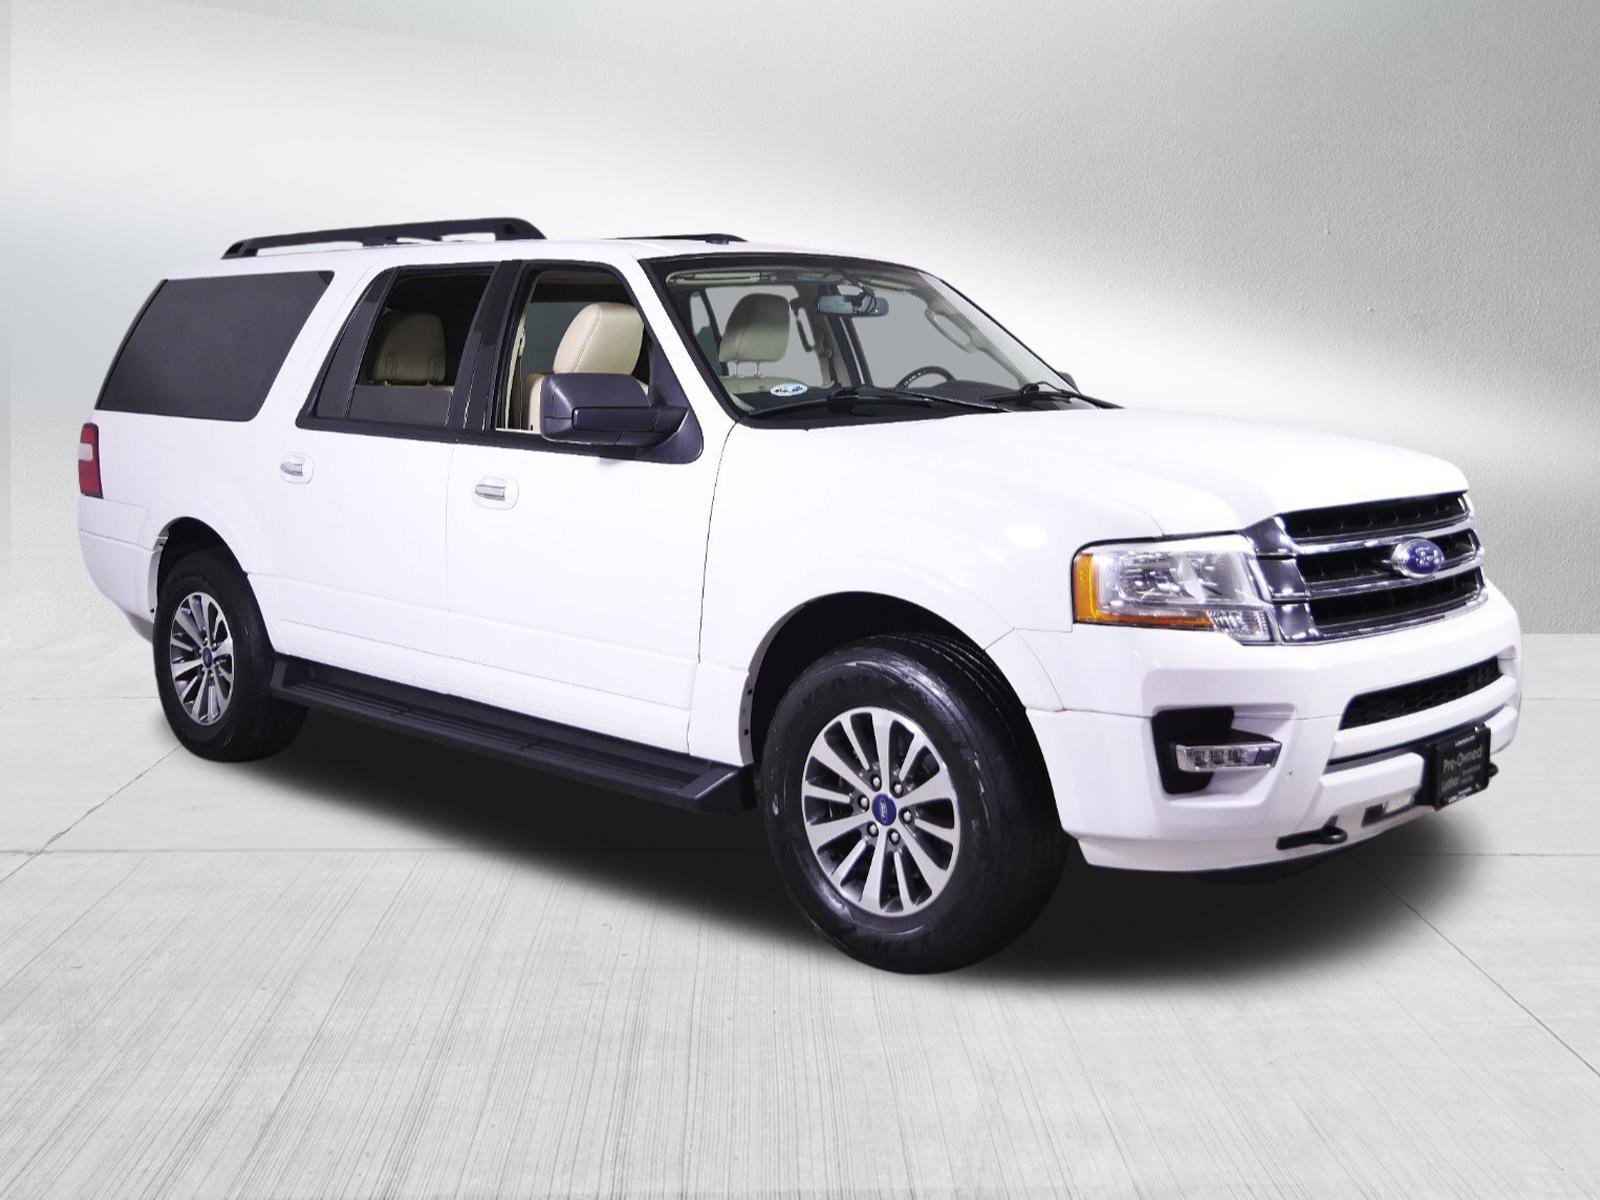 Used Ford Expedition EL for Sale Near Me in Minneapolis, MN - Autotrader